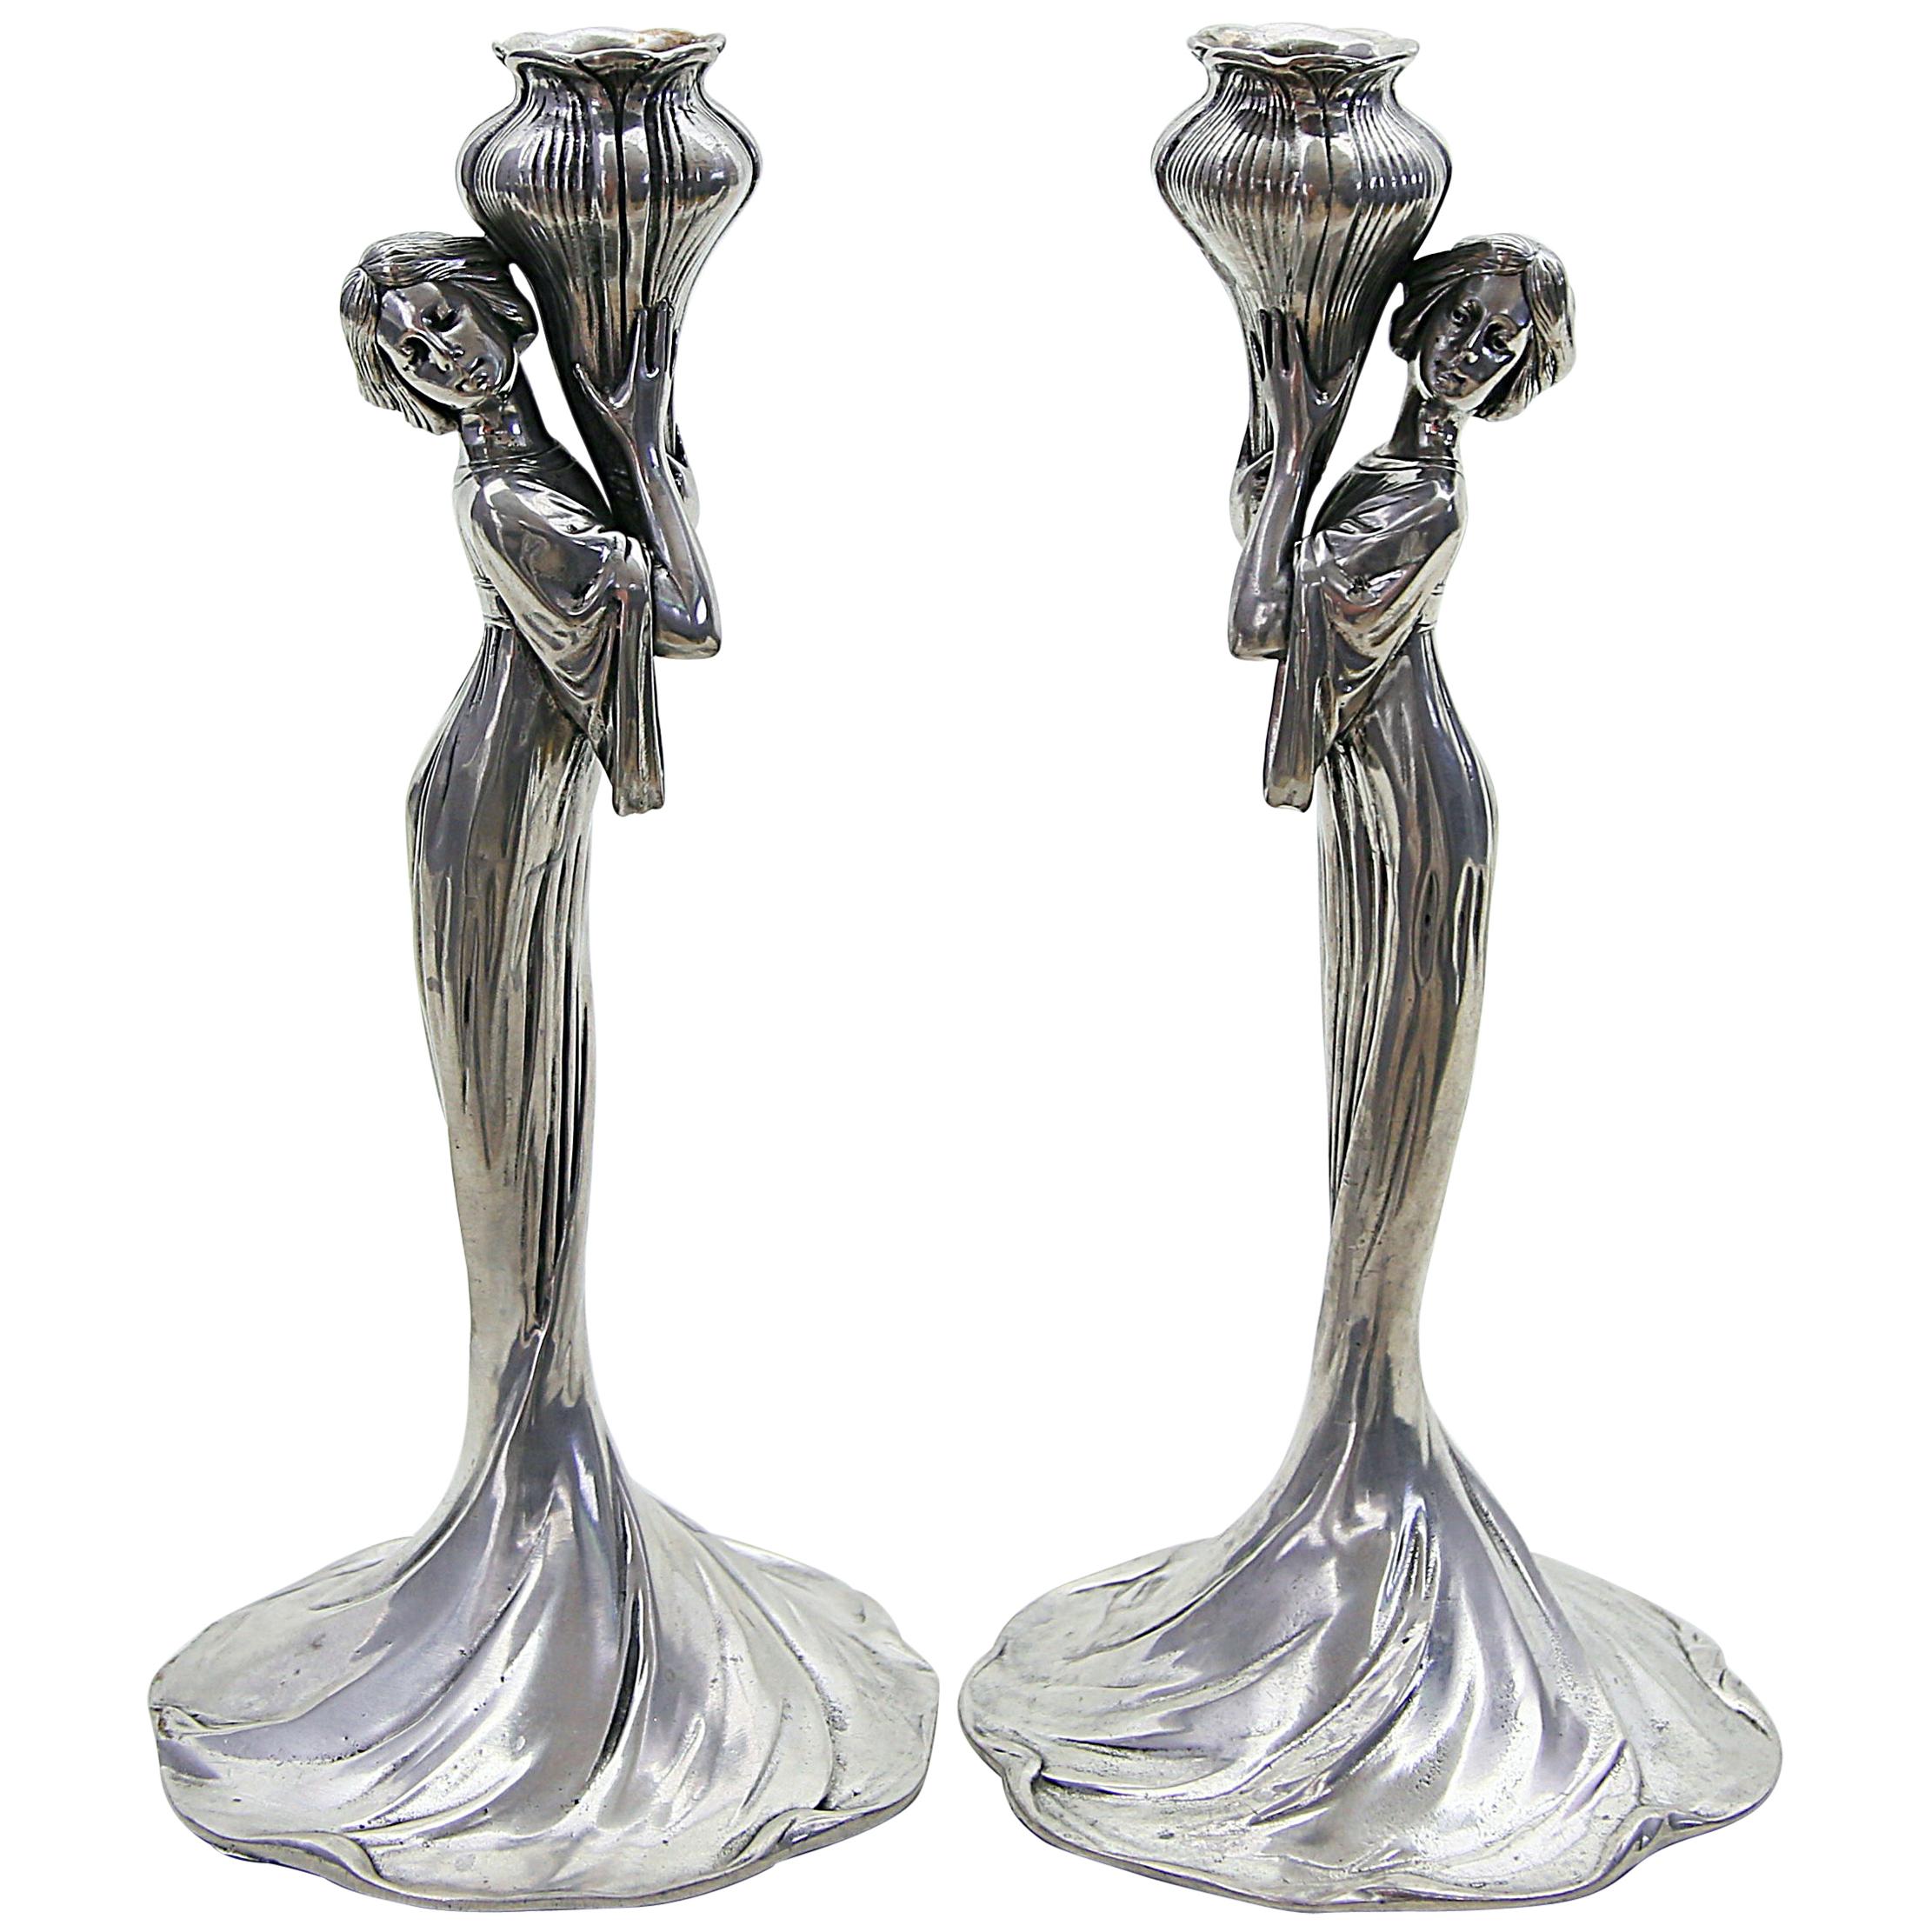 Pair of Candlesticks by Achille Gamba, Italy, First Half of the 20th Century